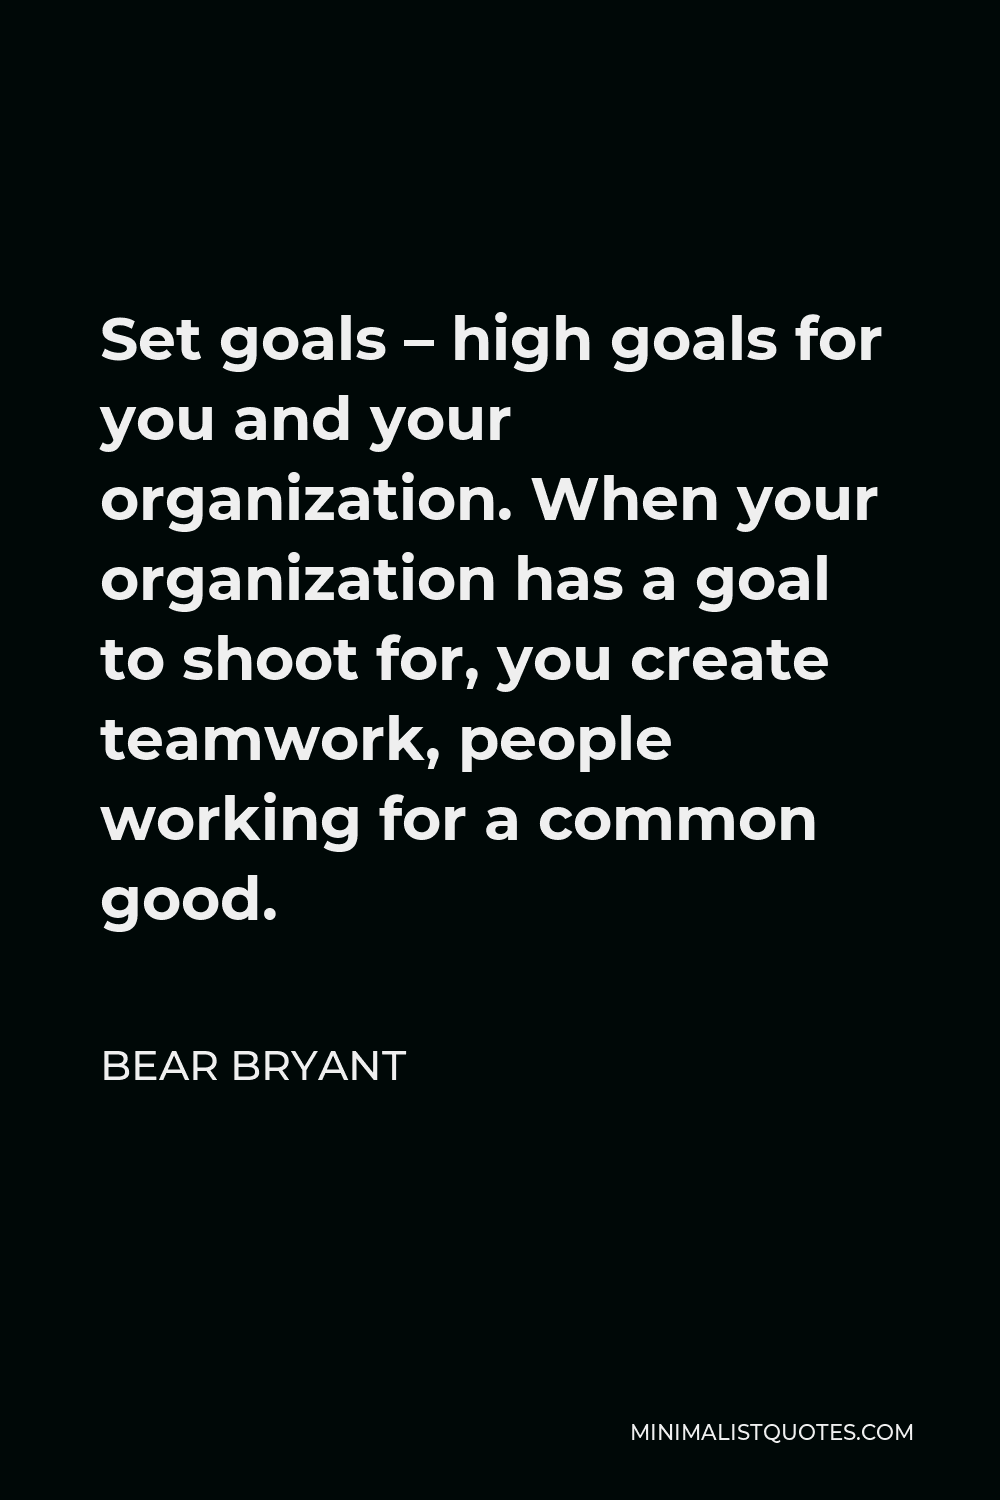 Bear Bryant Quote - Set goals – high goals for you and your organization. When your organization has a goal to shoot for, you create teamwork, people working for a common good.